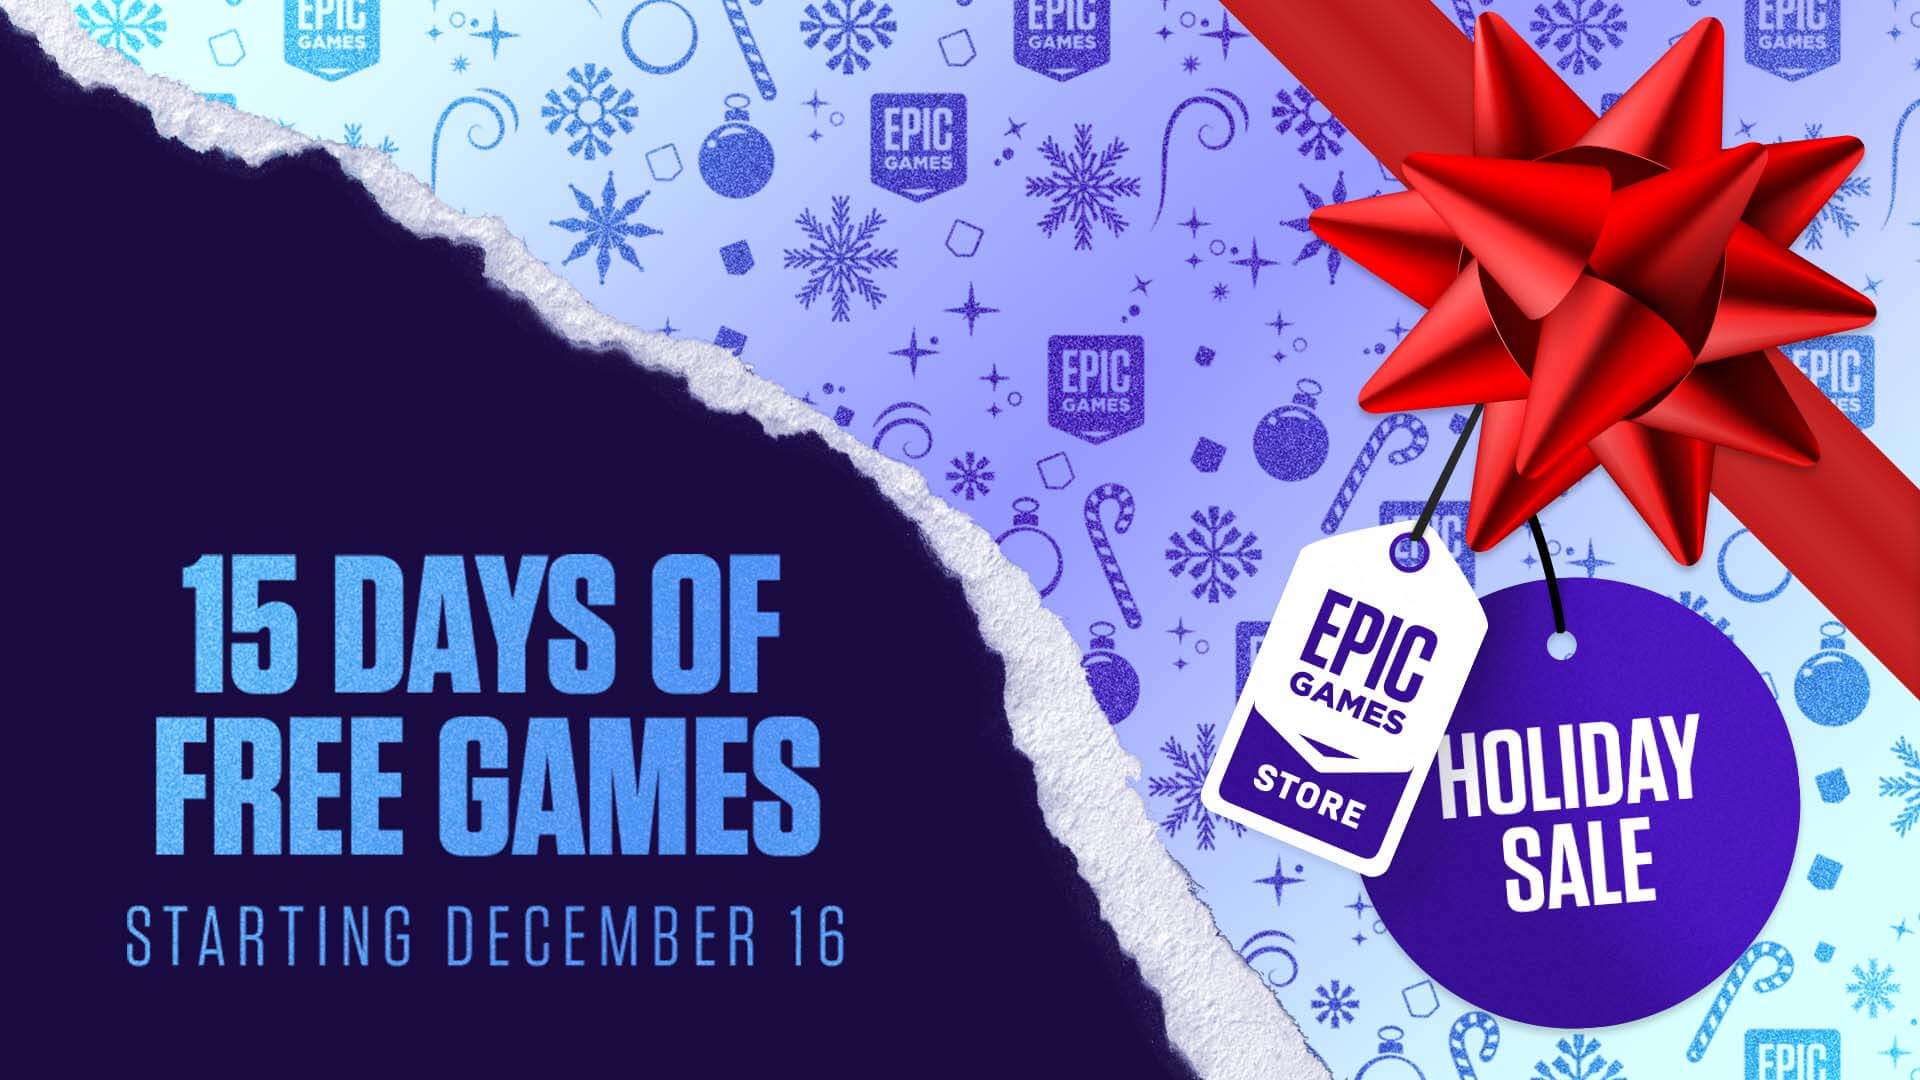 Leak Reveal Rest Of Epic Games 15 Days Of Free Games 21